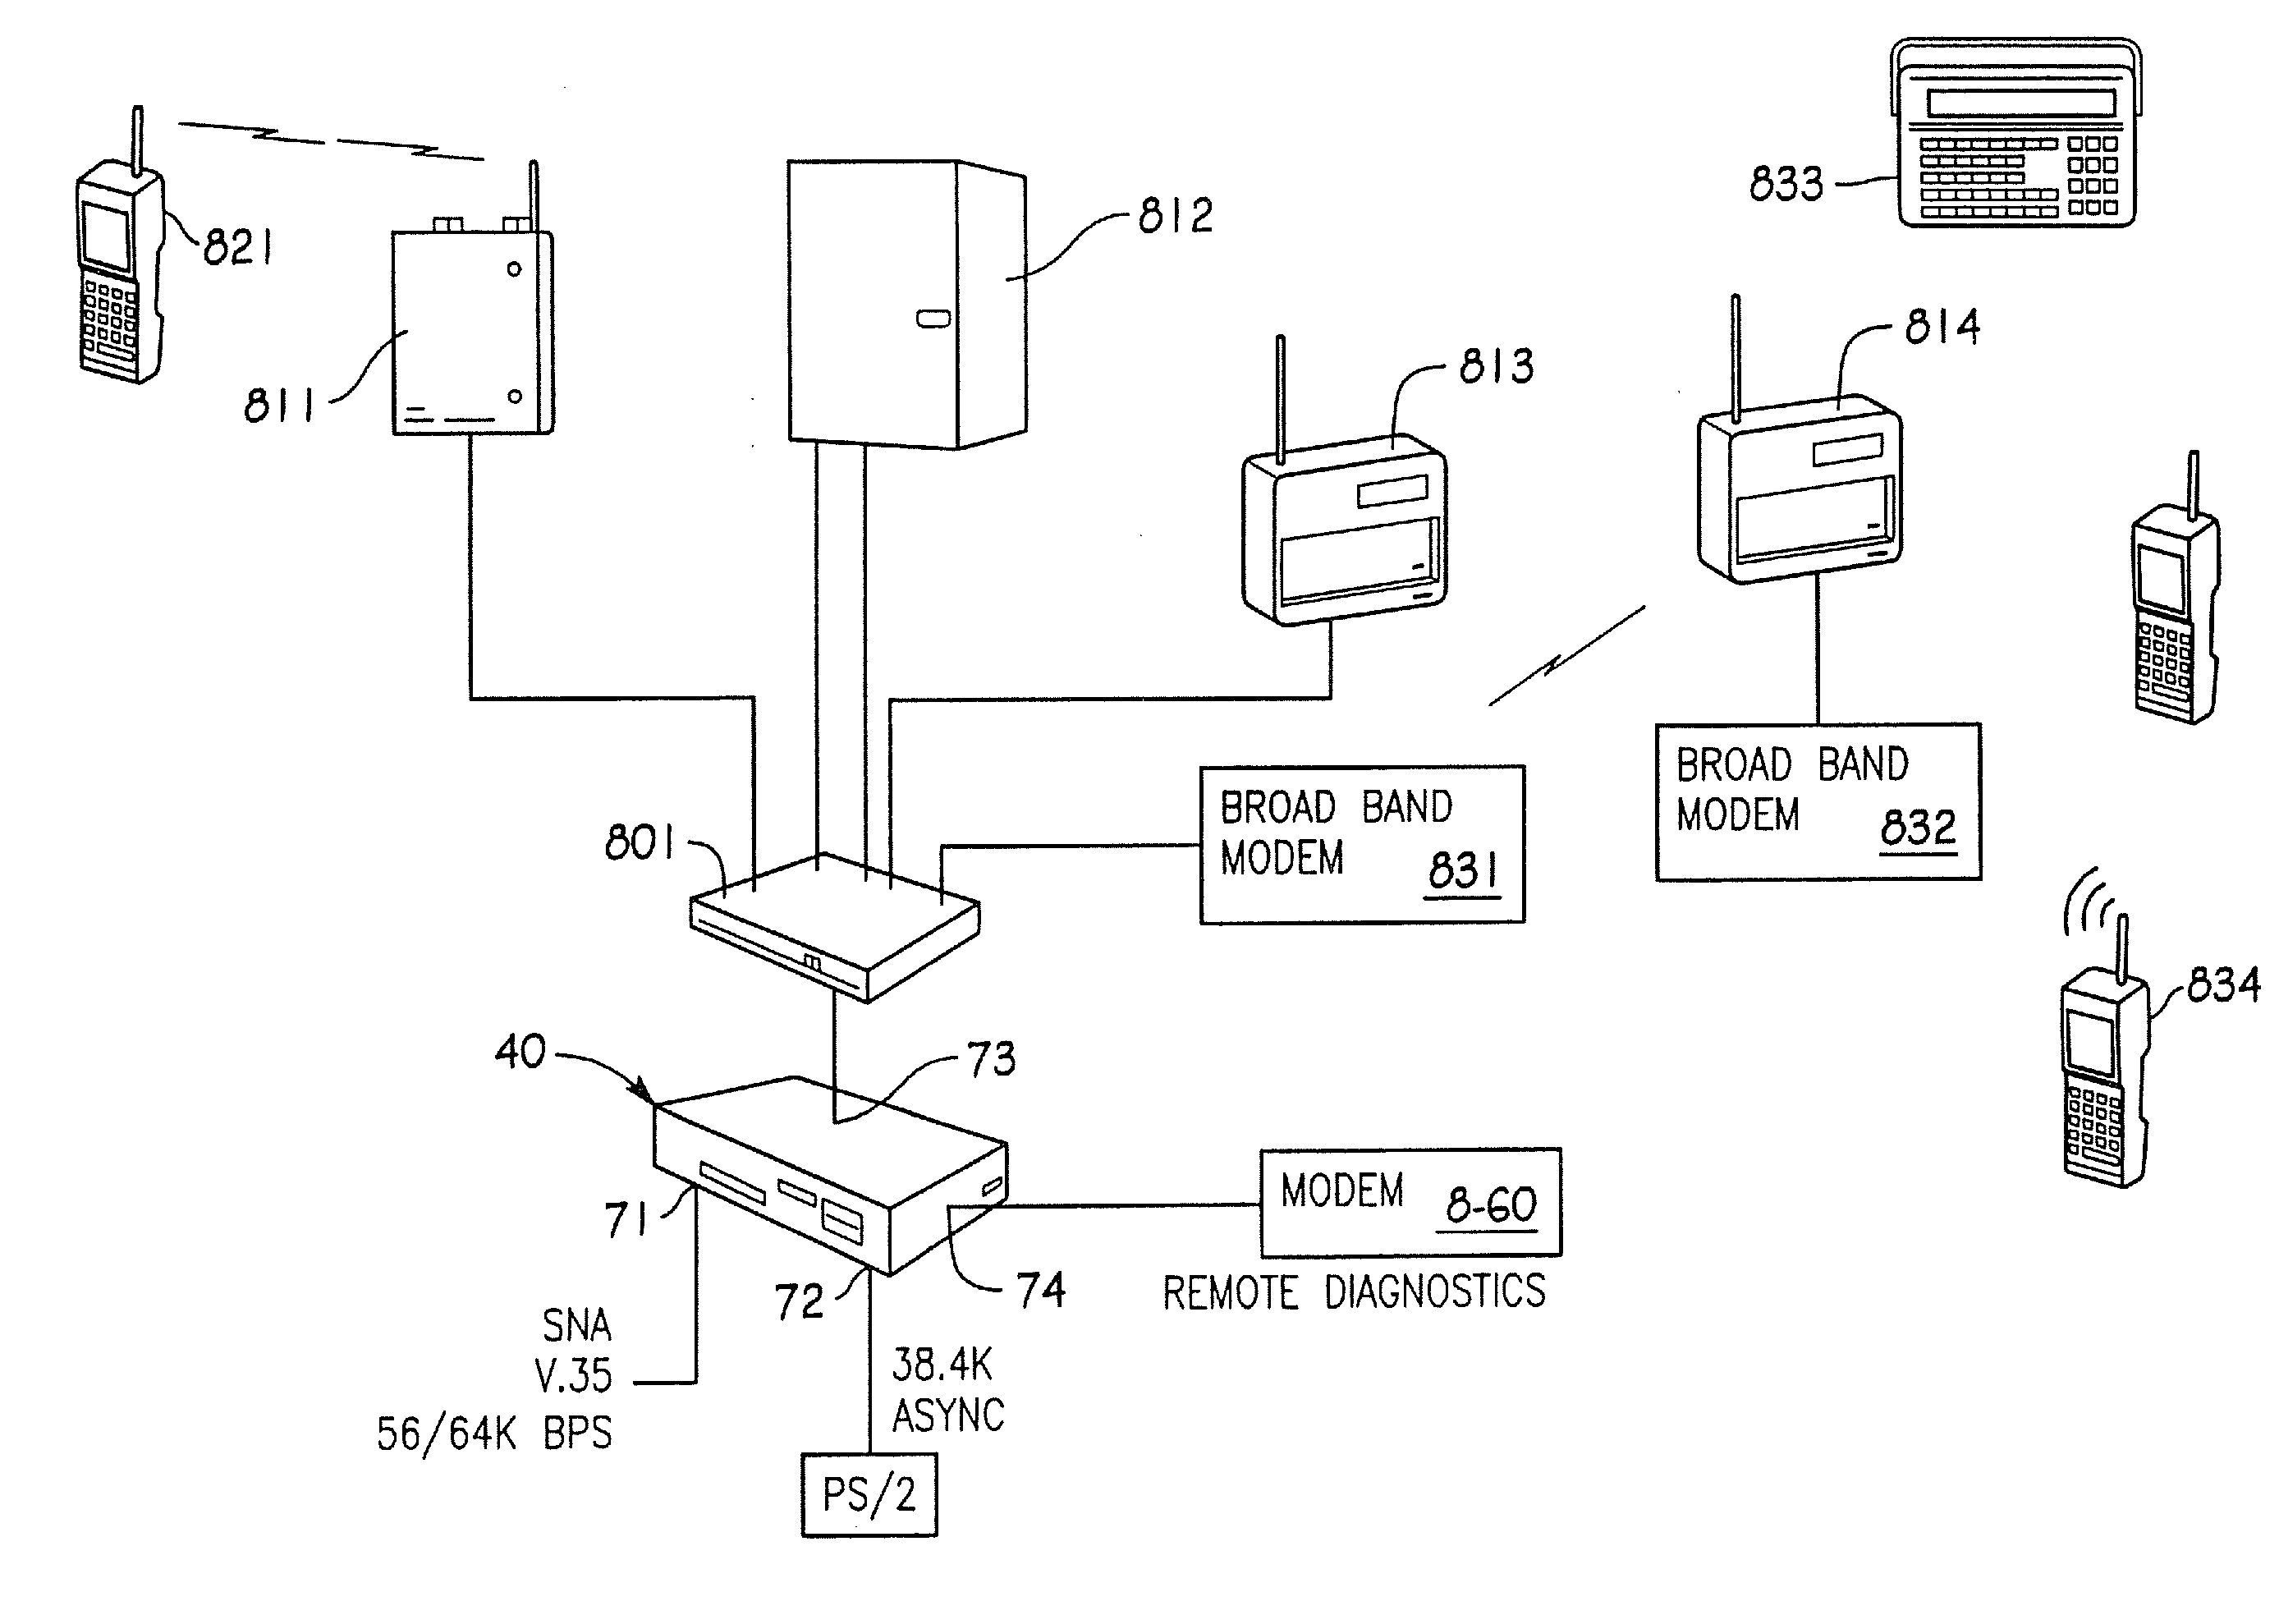 Remote radio data communication system with data rate switching